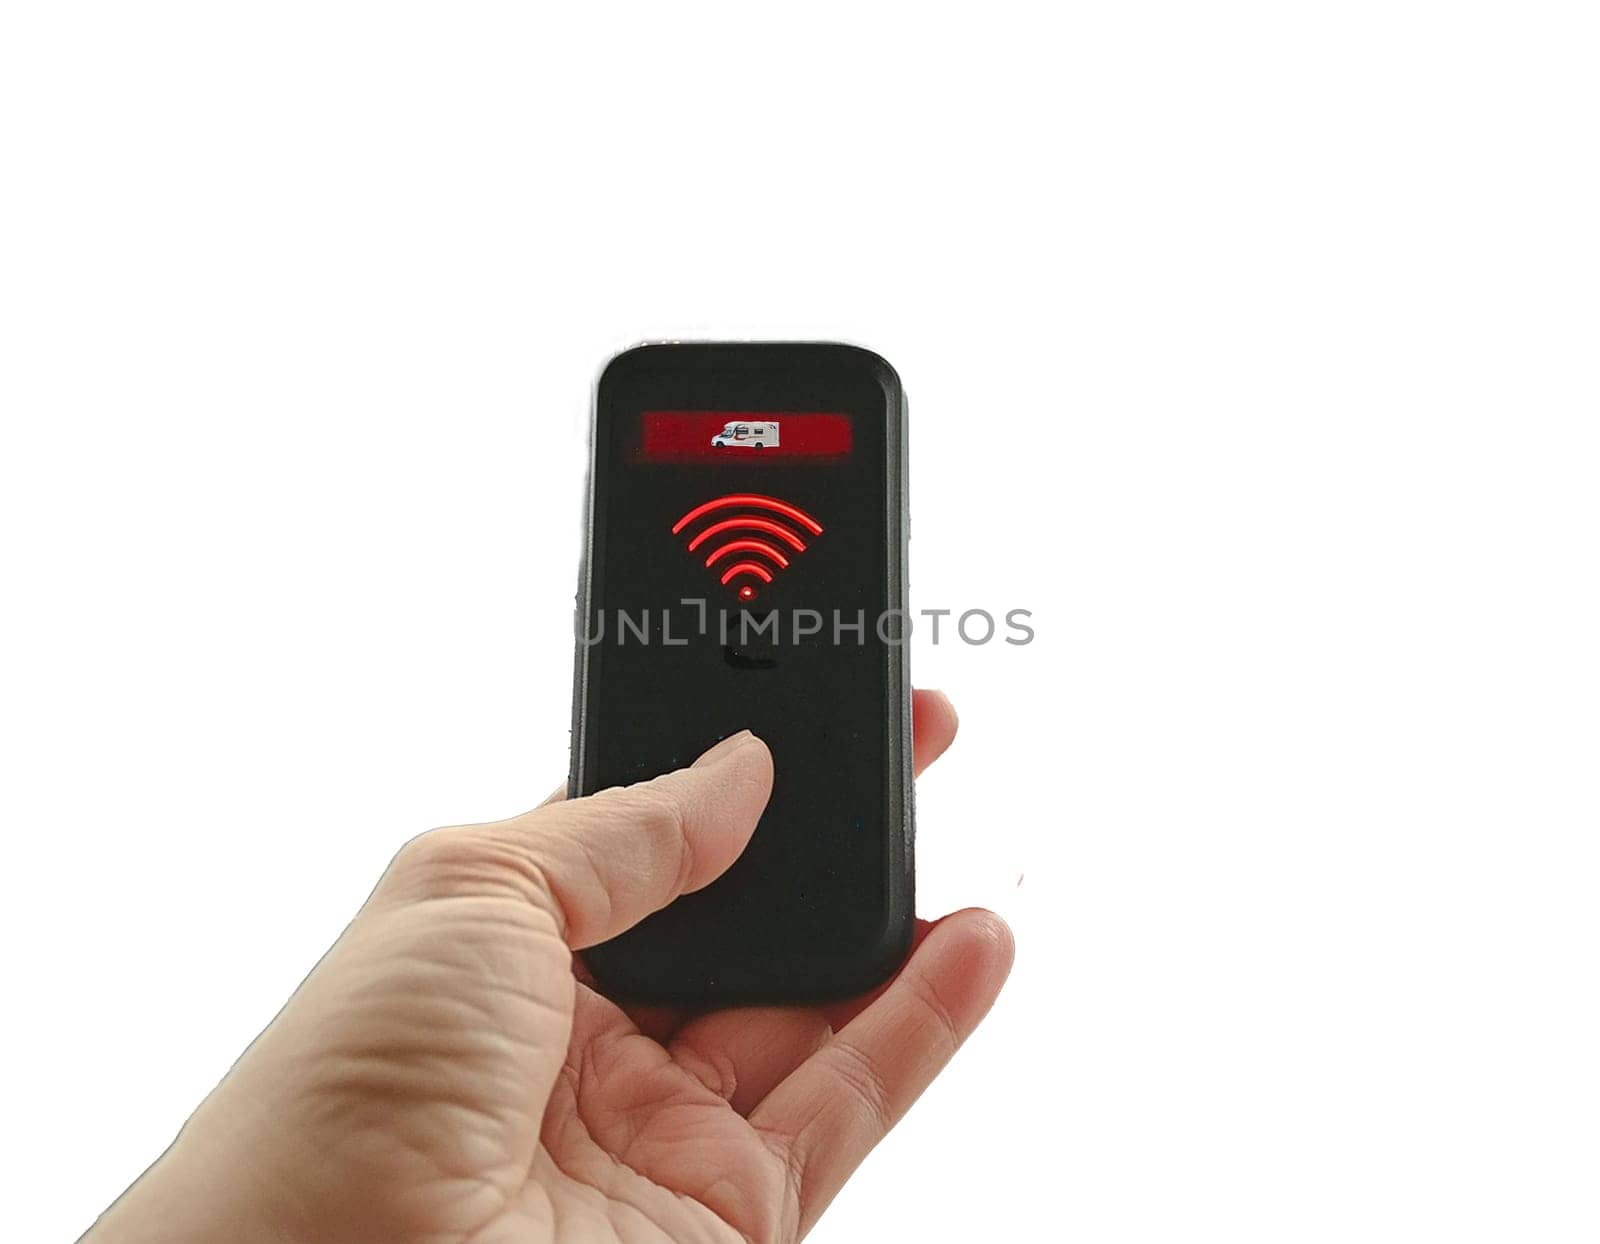 Press car alarm remote control by hand to lock or unlock the car. by JFsPic